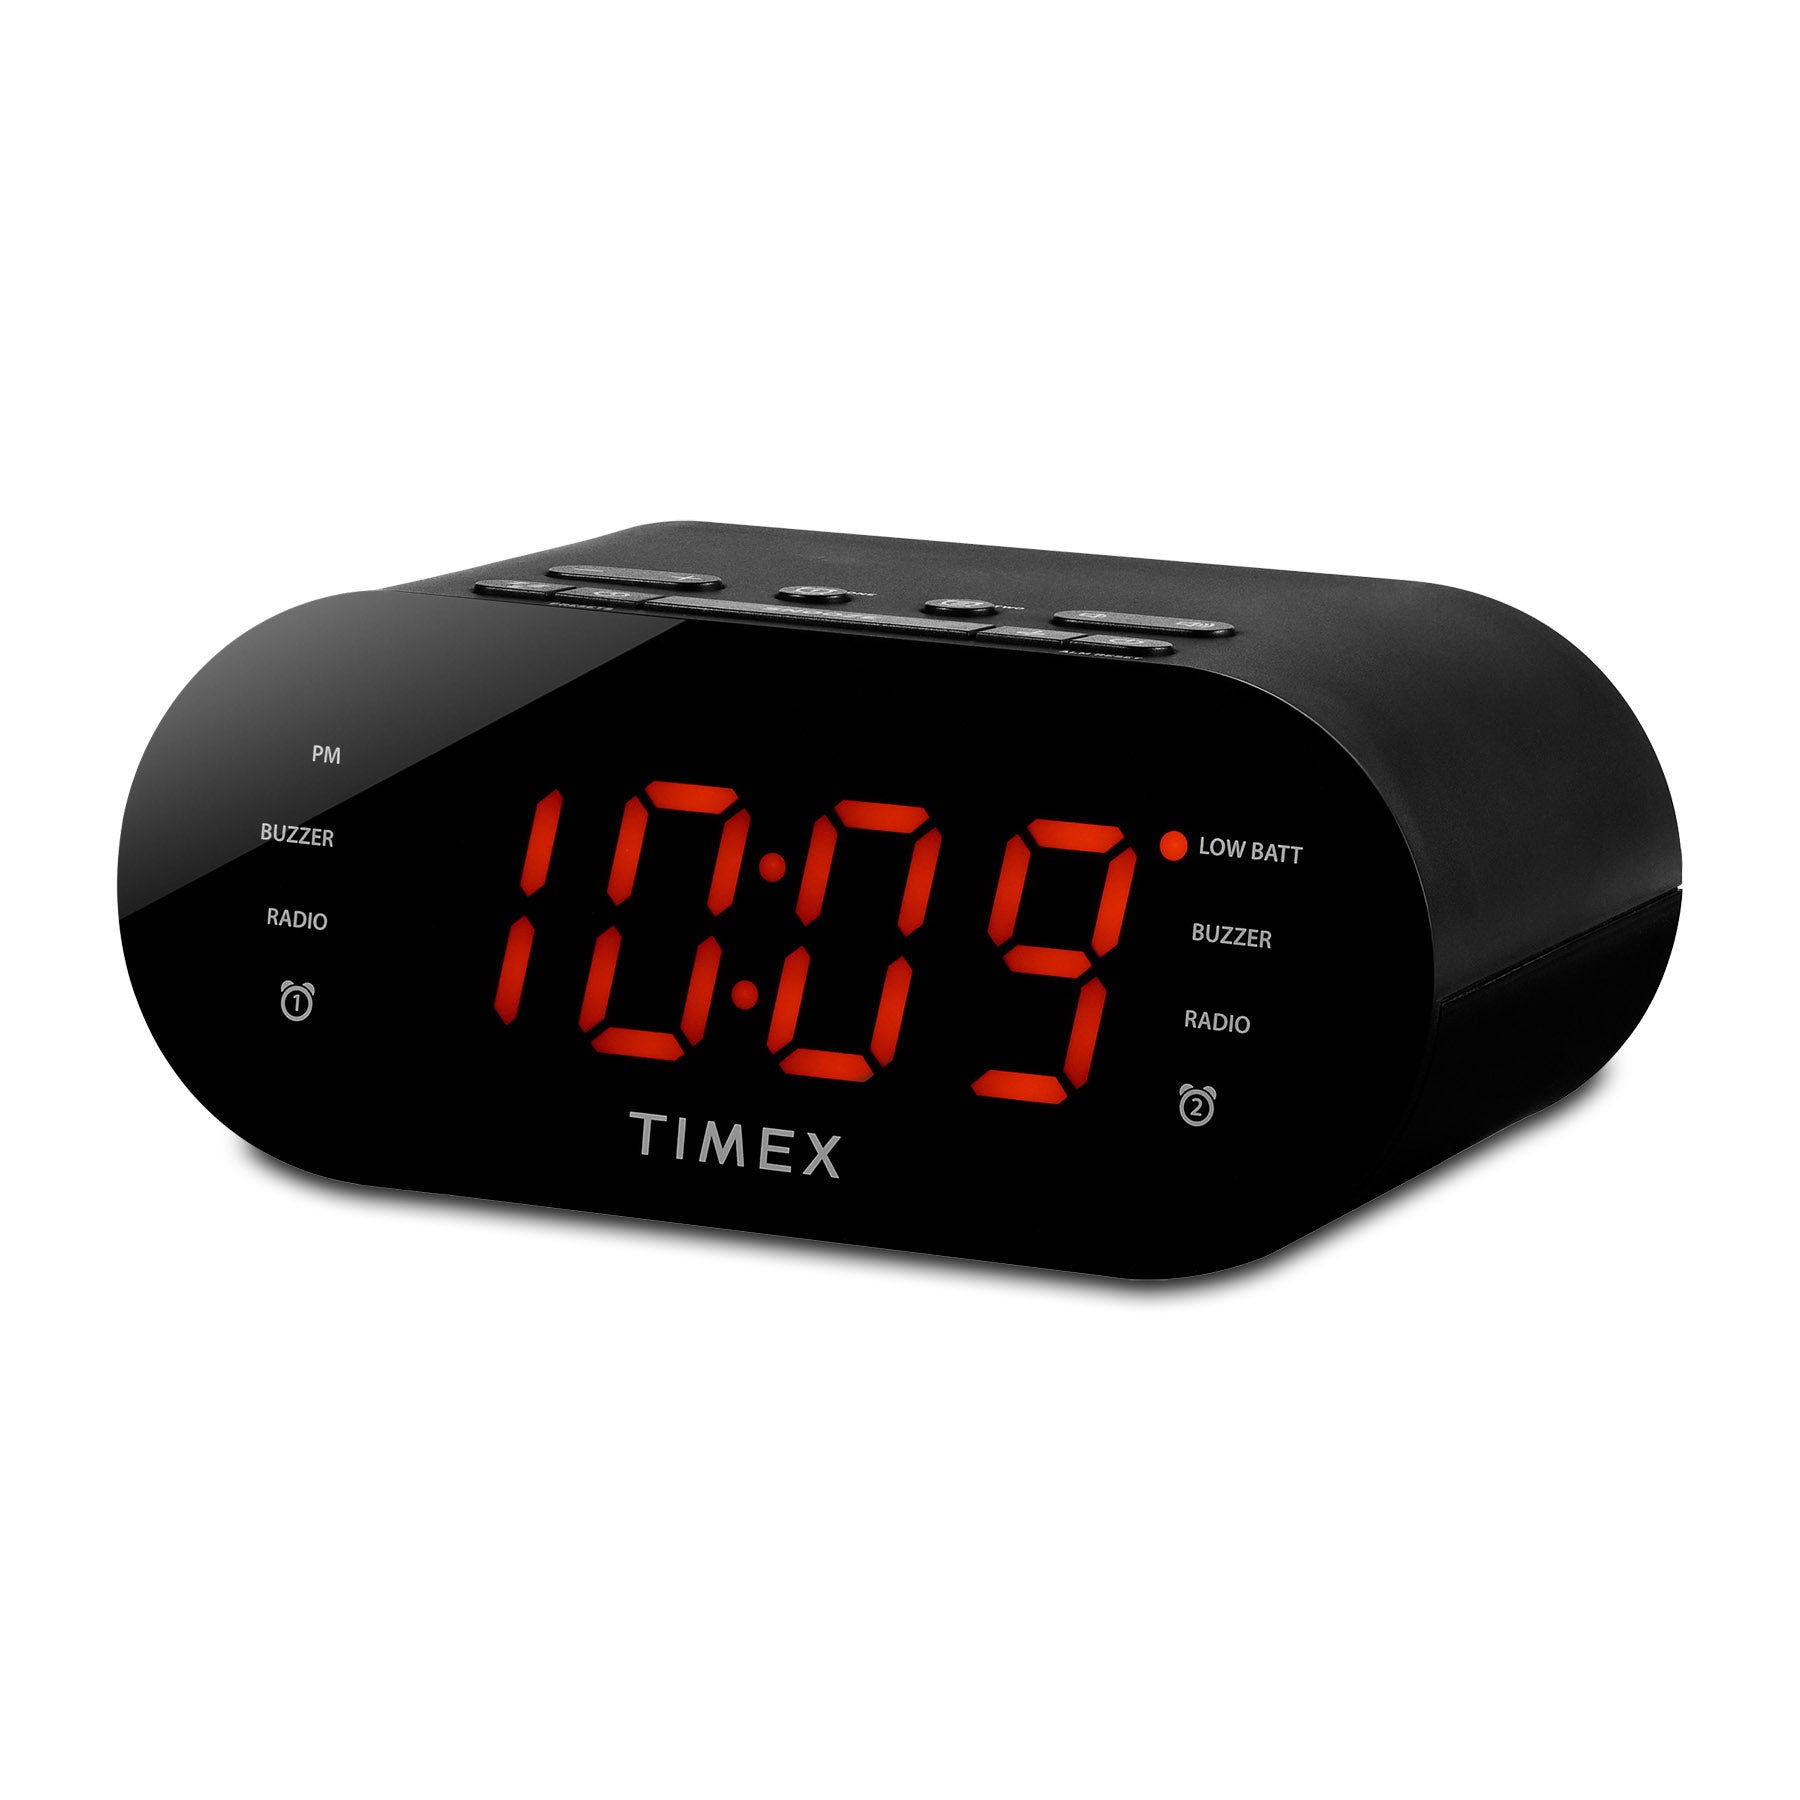 Timex Alarm Clock for Bedroom with FM Radio and USB Charging - Black (T232B)